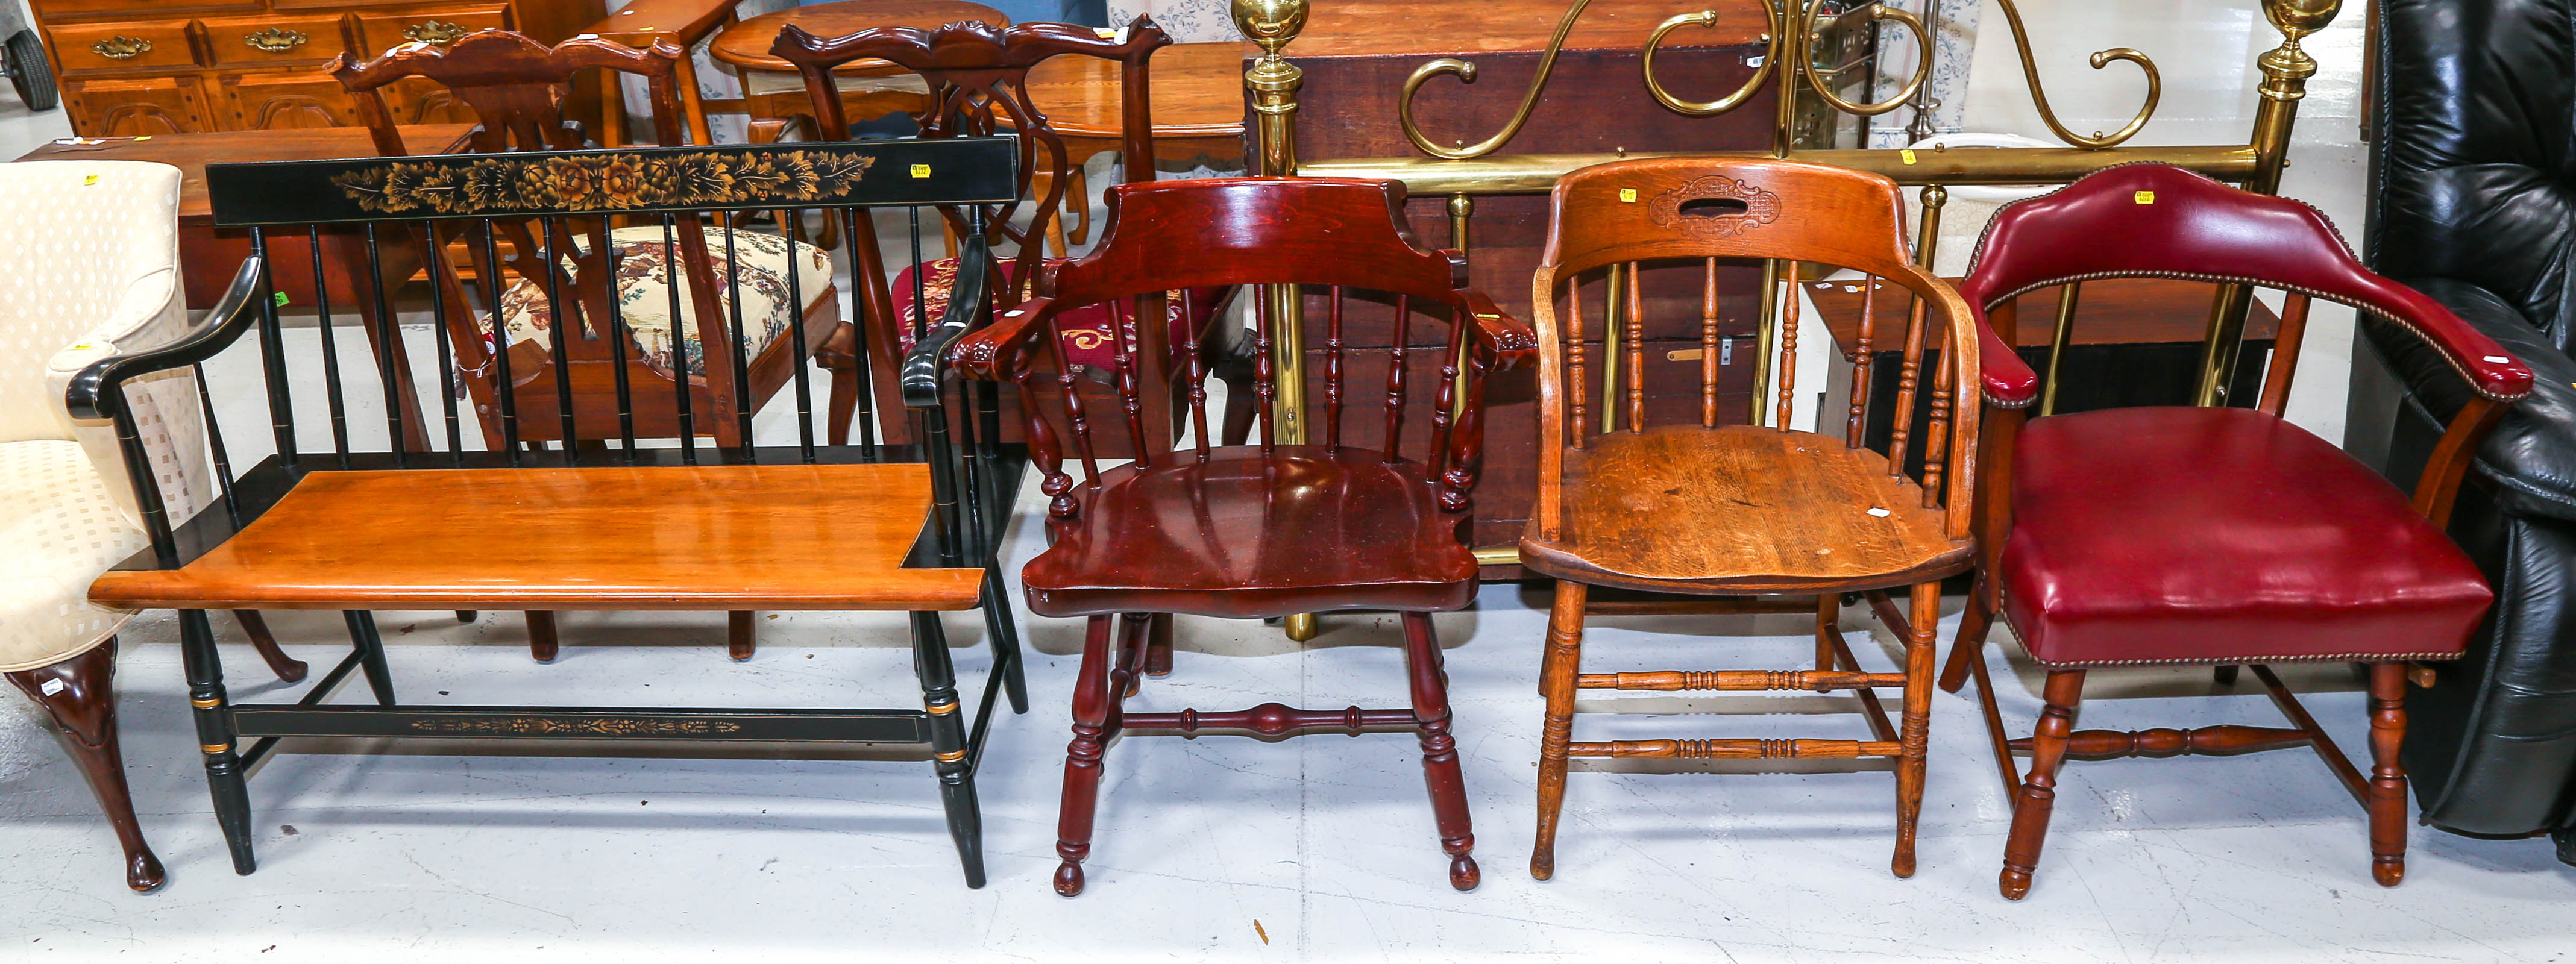 FOUR ASSORTED CHAIRS Including 2e92d1